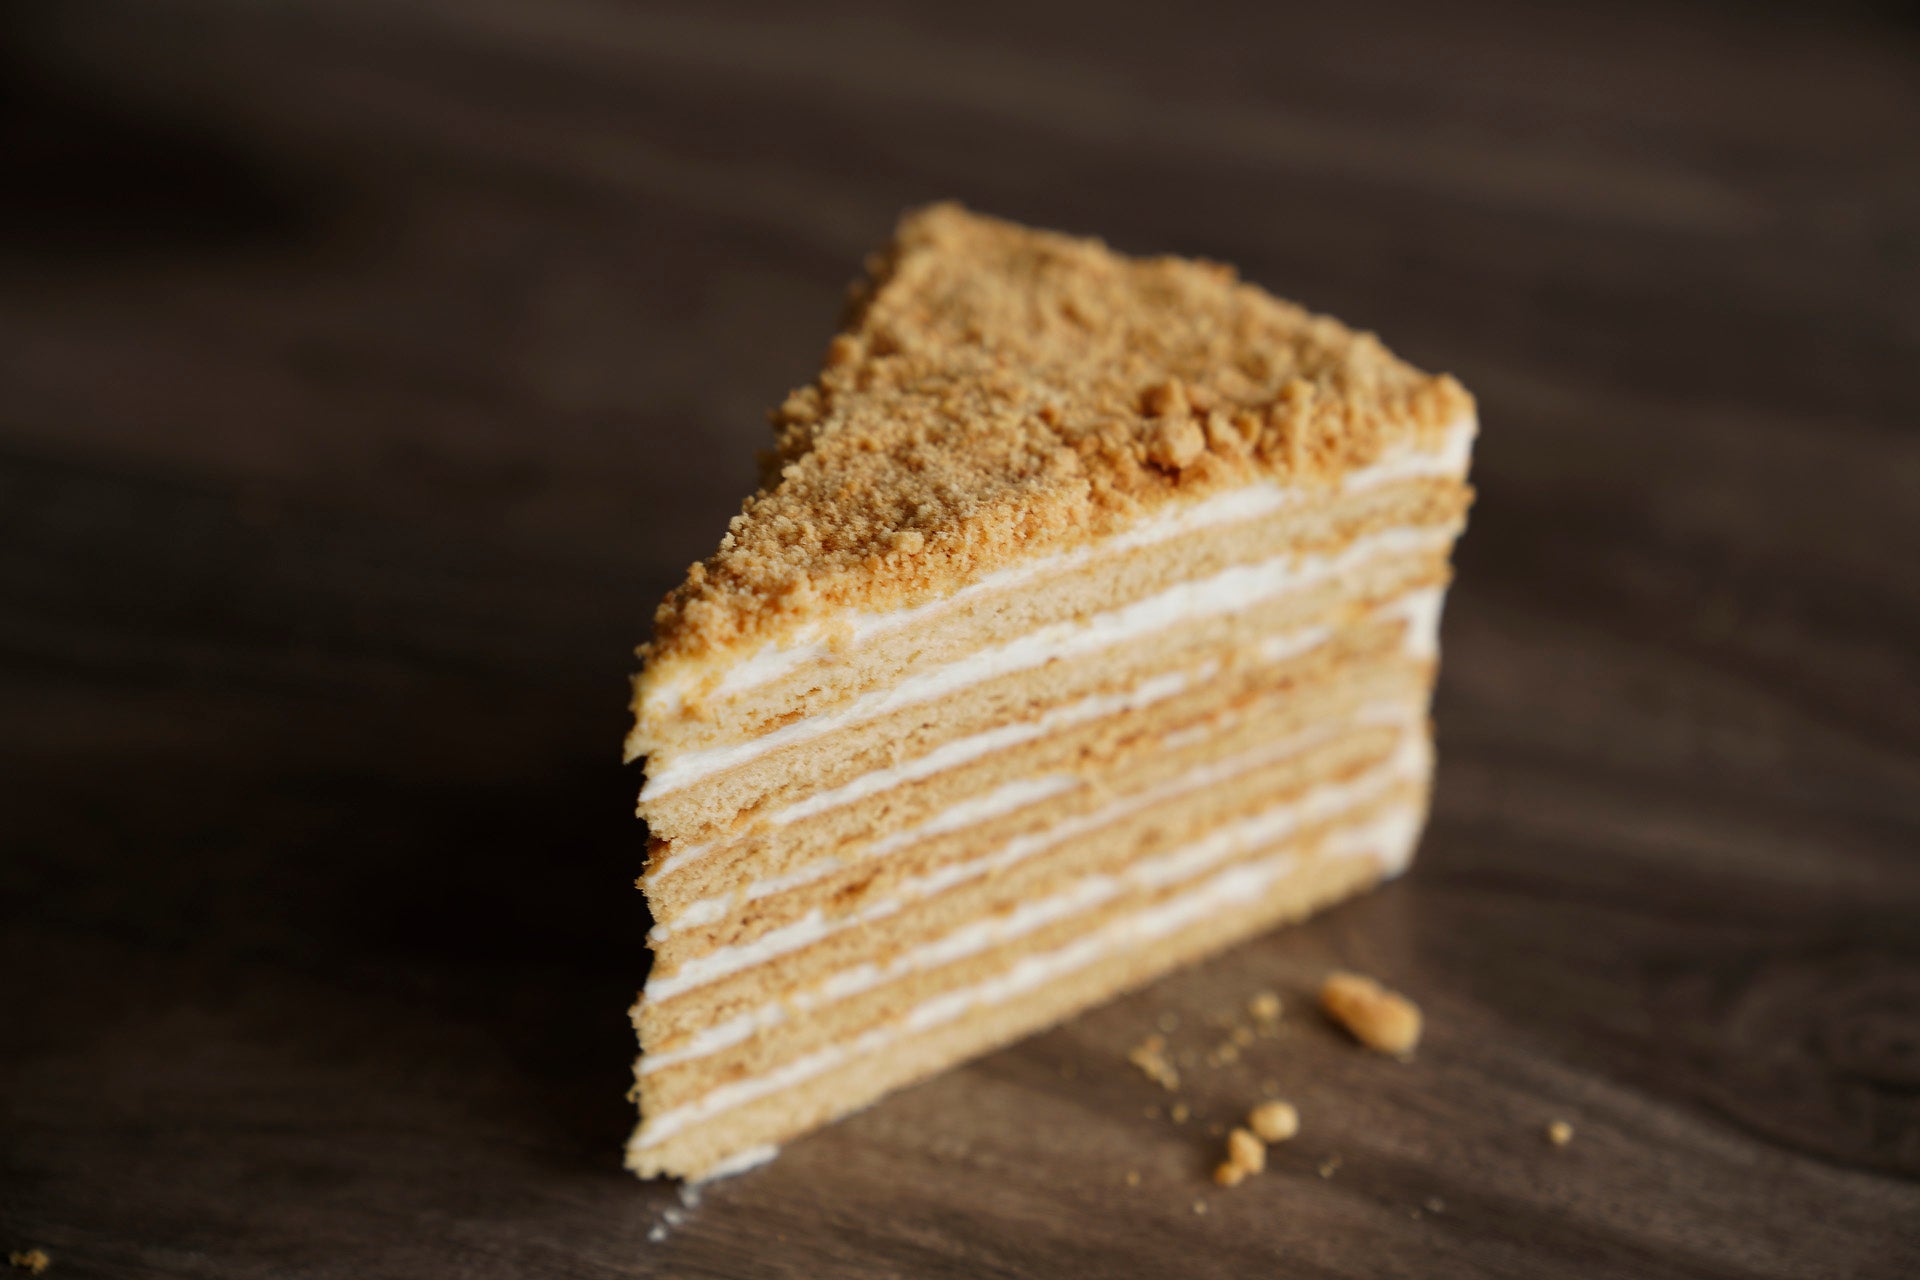 Thin layers of soft, airy cakes sandwiched between a rich mouth-watering honey cream.